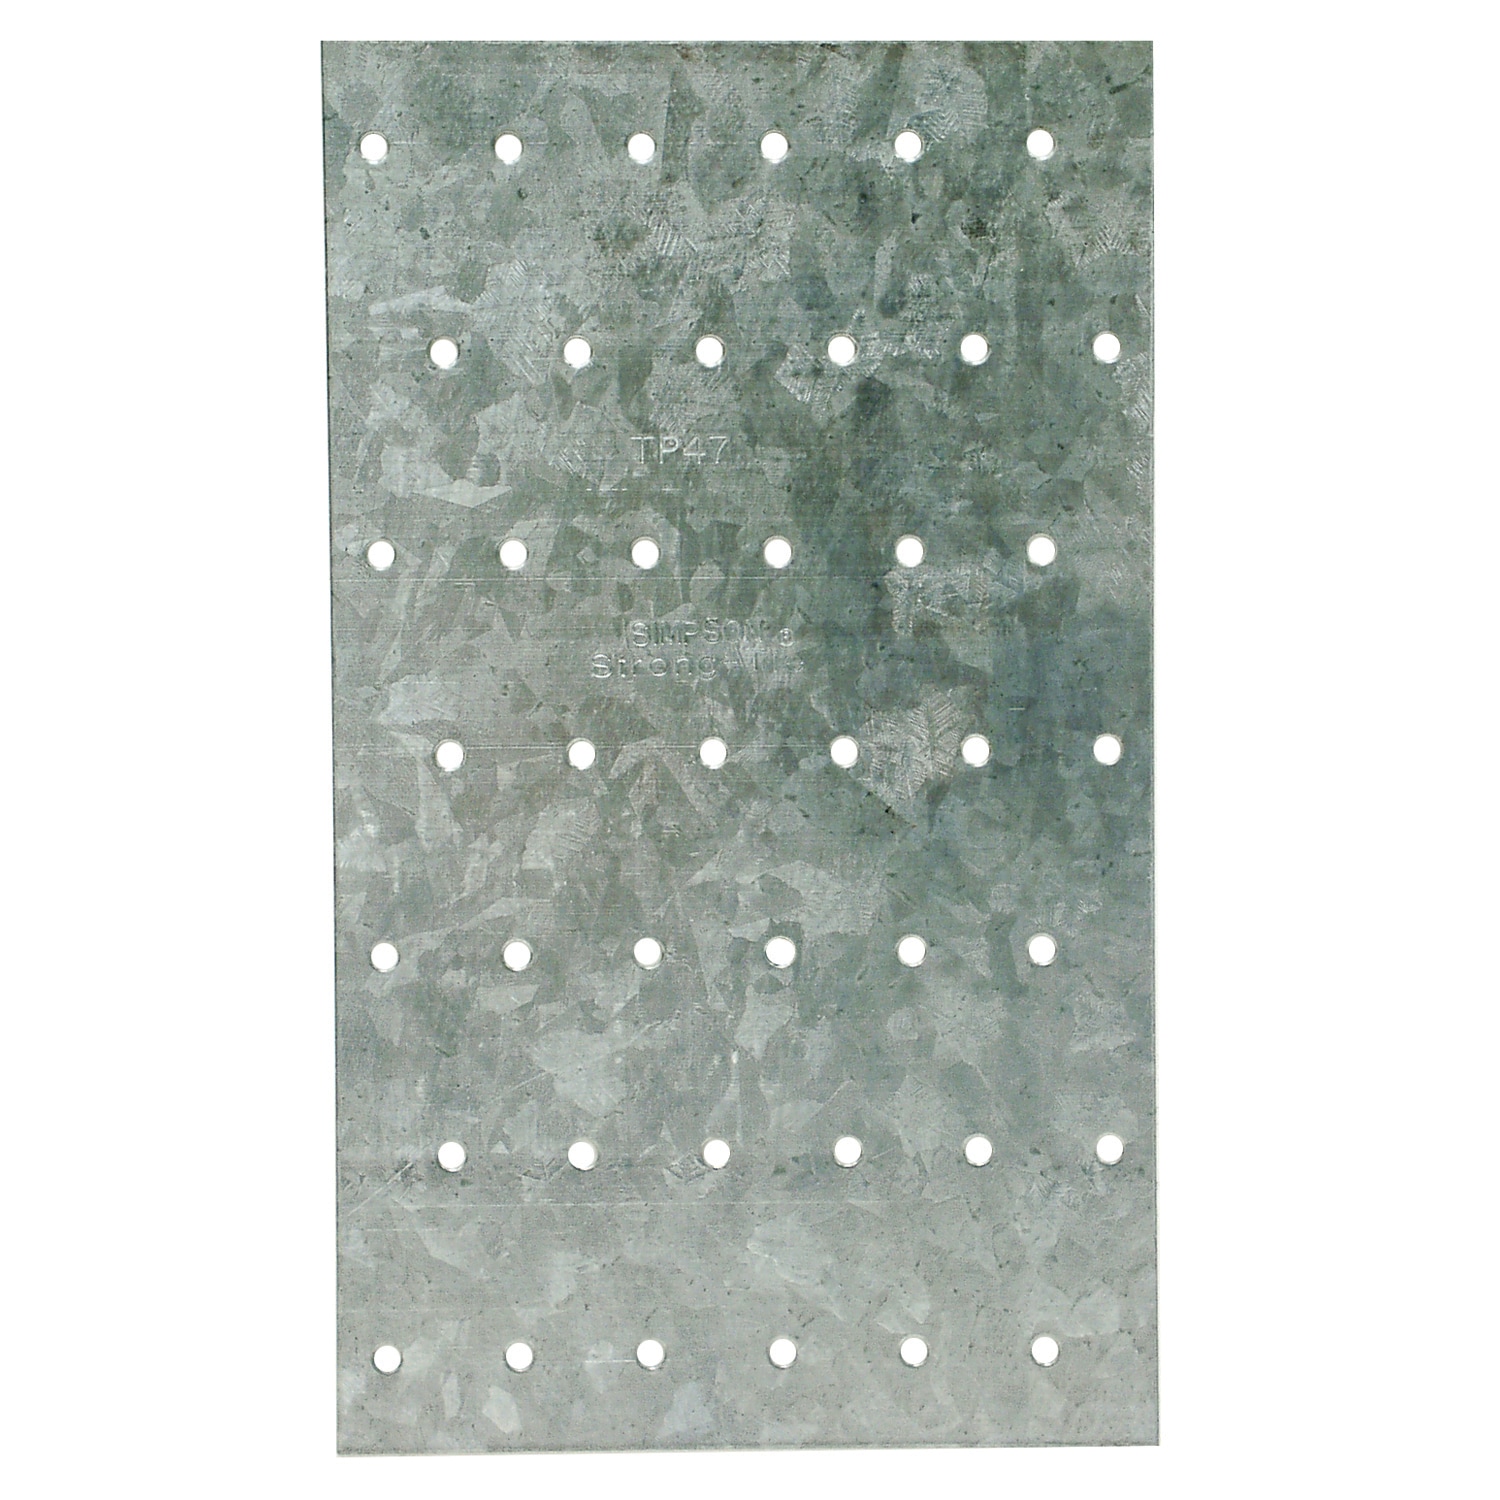 Sigma ProConnex 2-1/2-in x 1-1/2-in-Gauge Nail Plates in the Mending & Nail  Plates department at Lowes.com